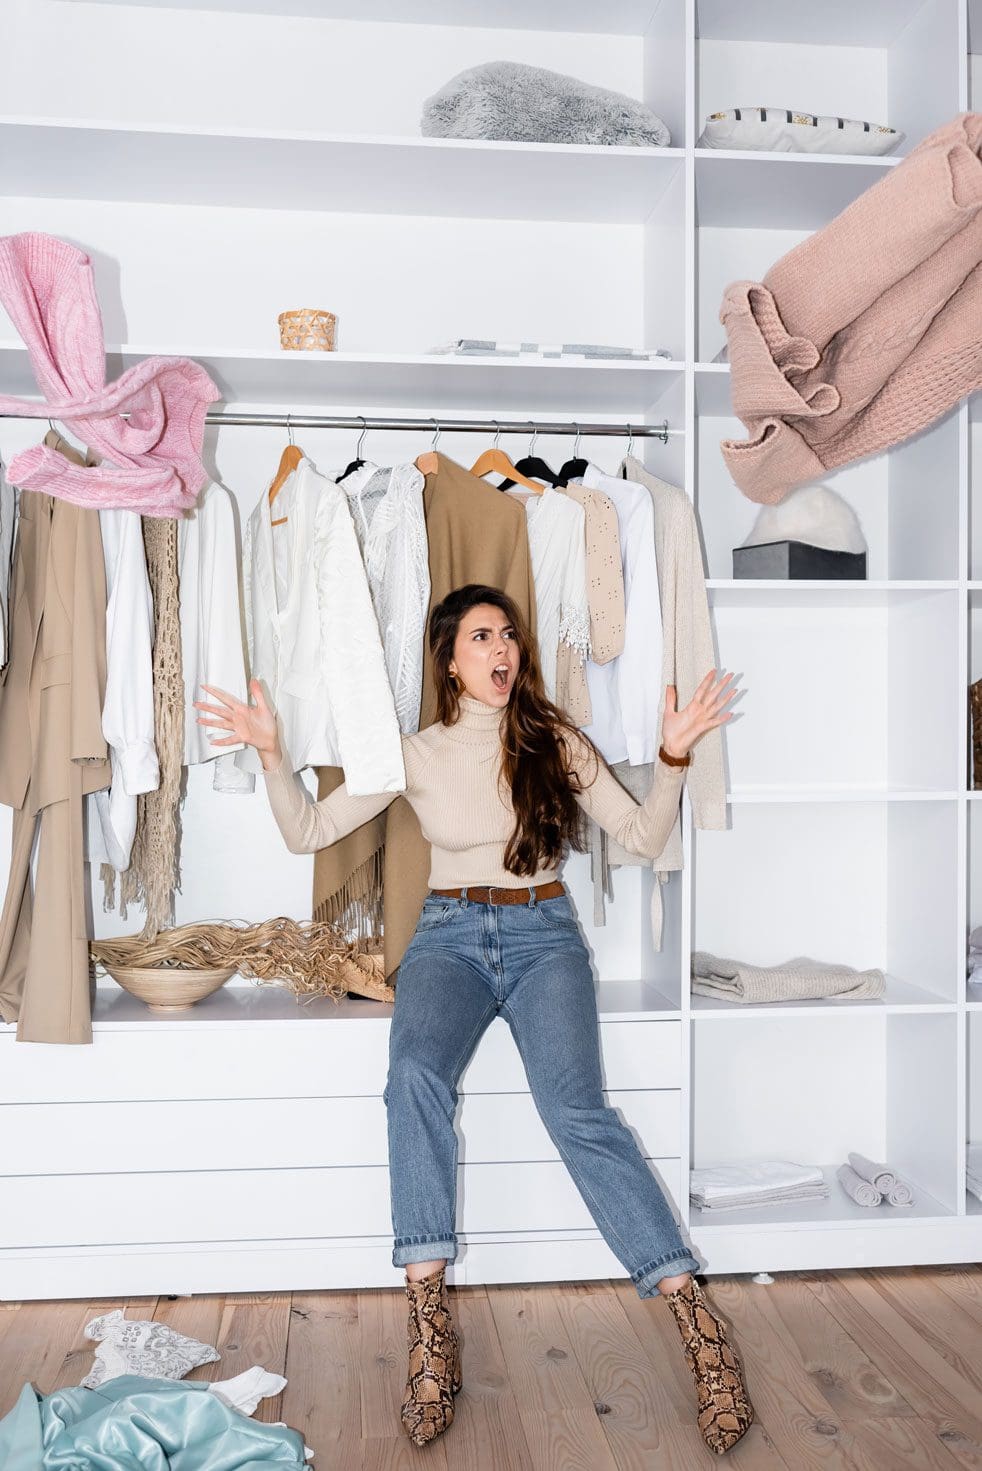 An image of an angry women sat in a wardrobe throwing her clothes out